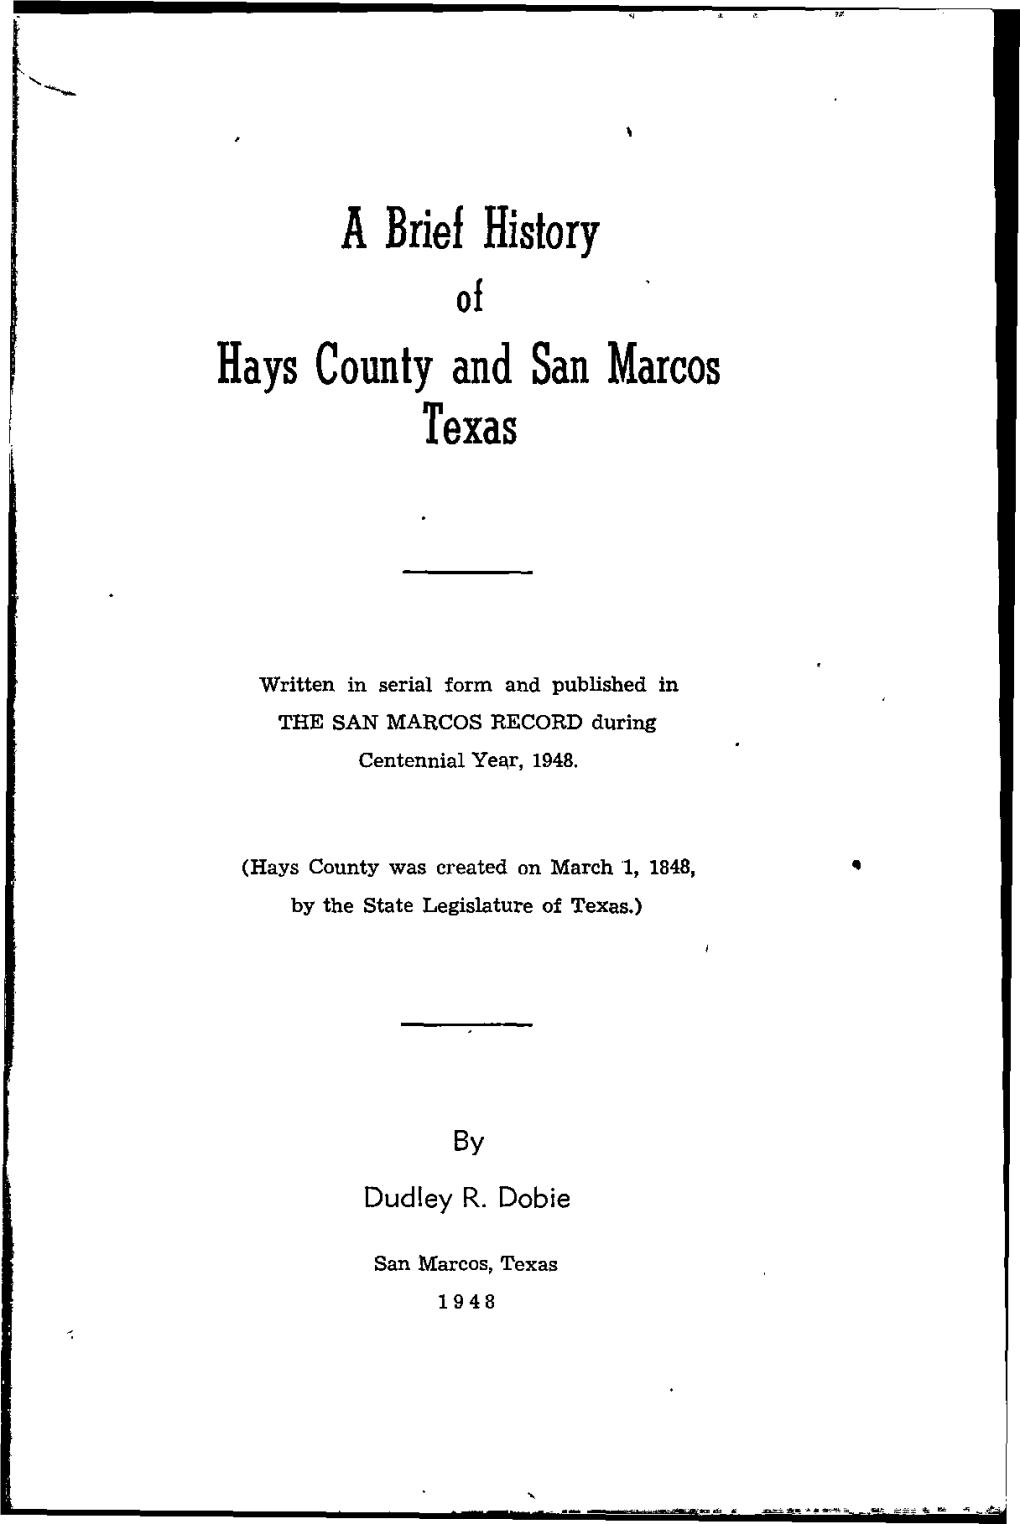 A BRIEF HISTORY of HAYS COUNTY and SAN MARCOS, TEXAS